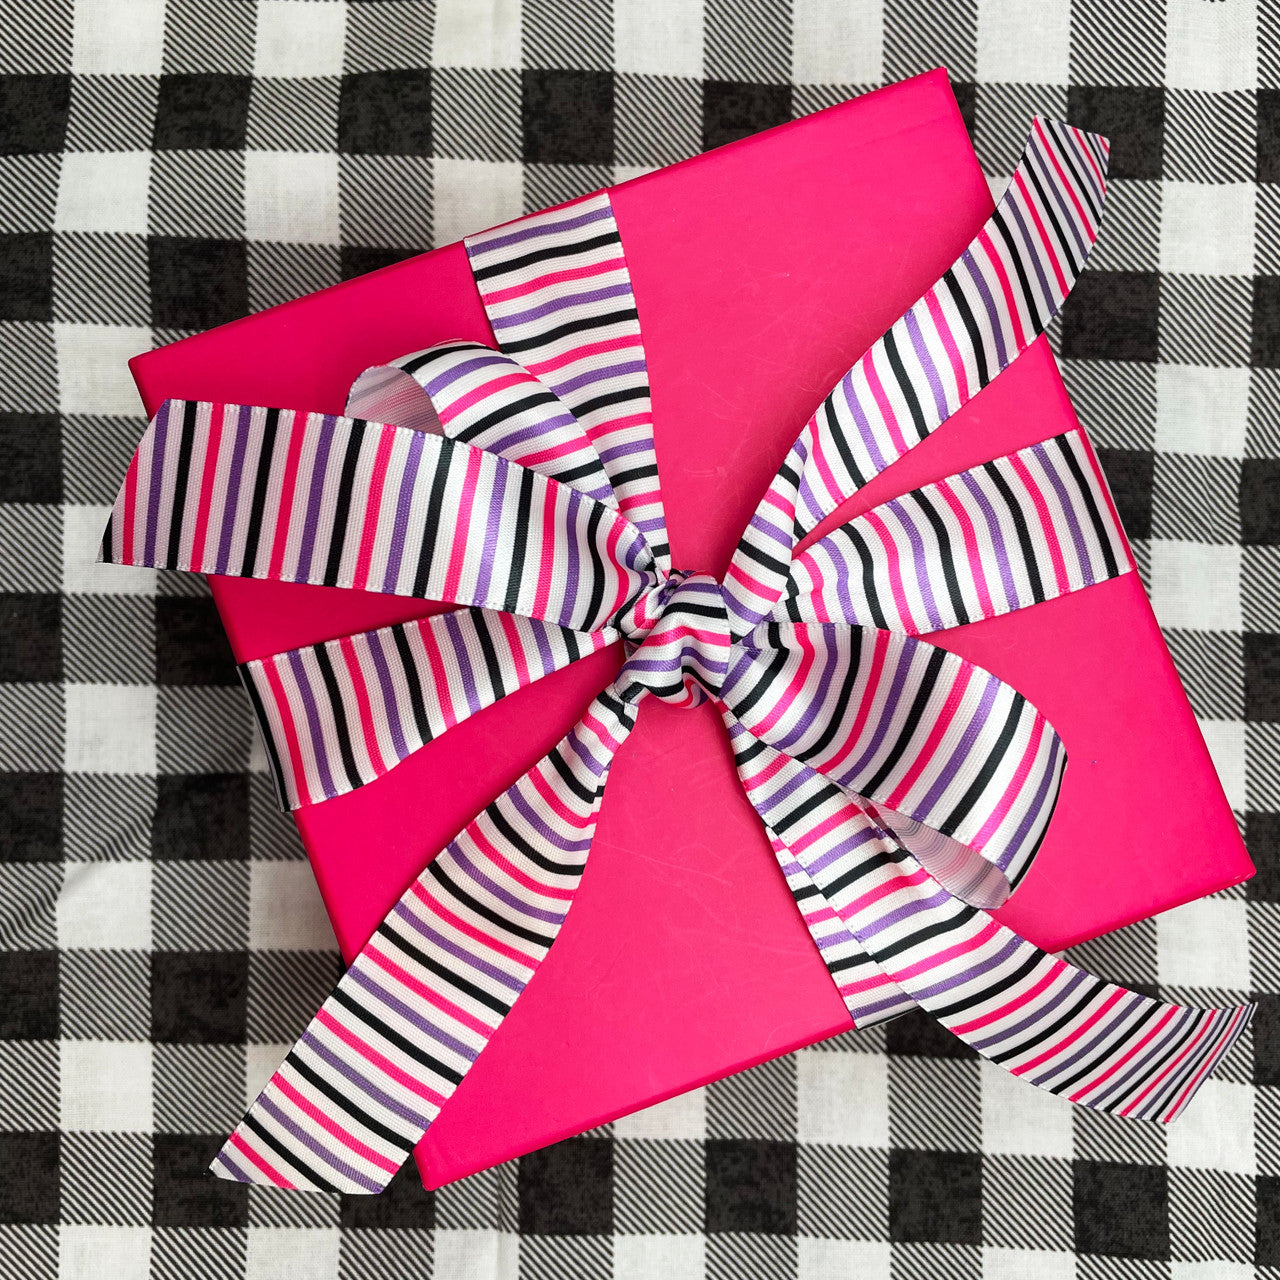 Our pink, lavender and black stripes make a beautiful bow for a Halloween gift or gift wrap at any other time of year!